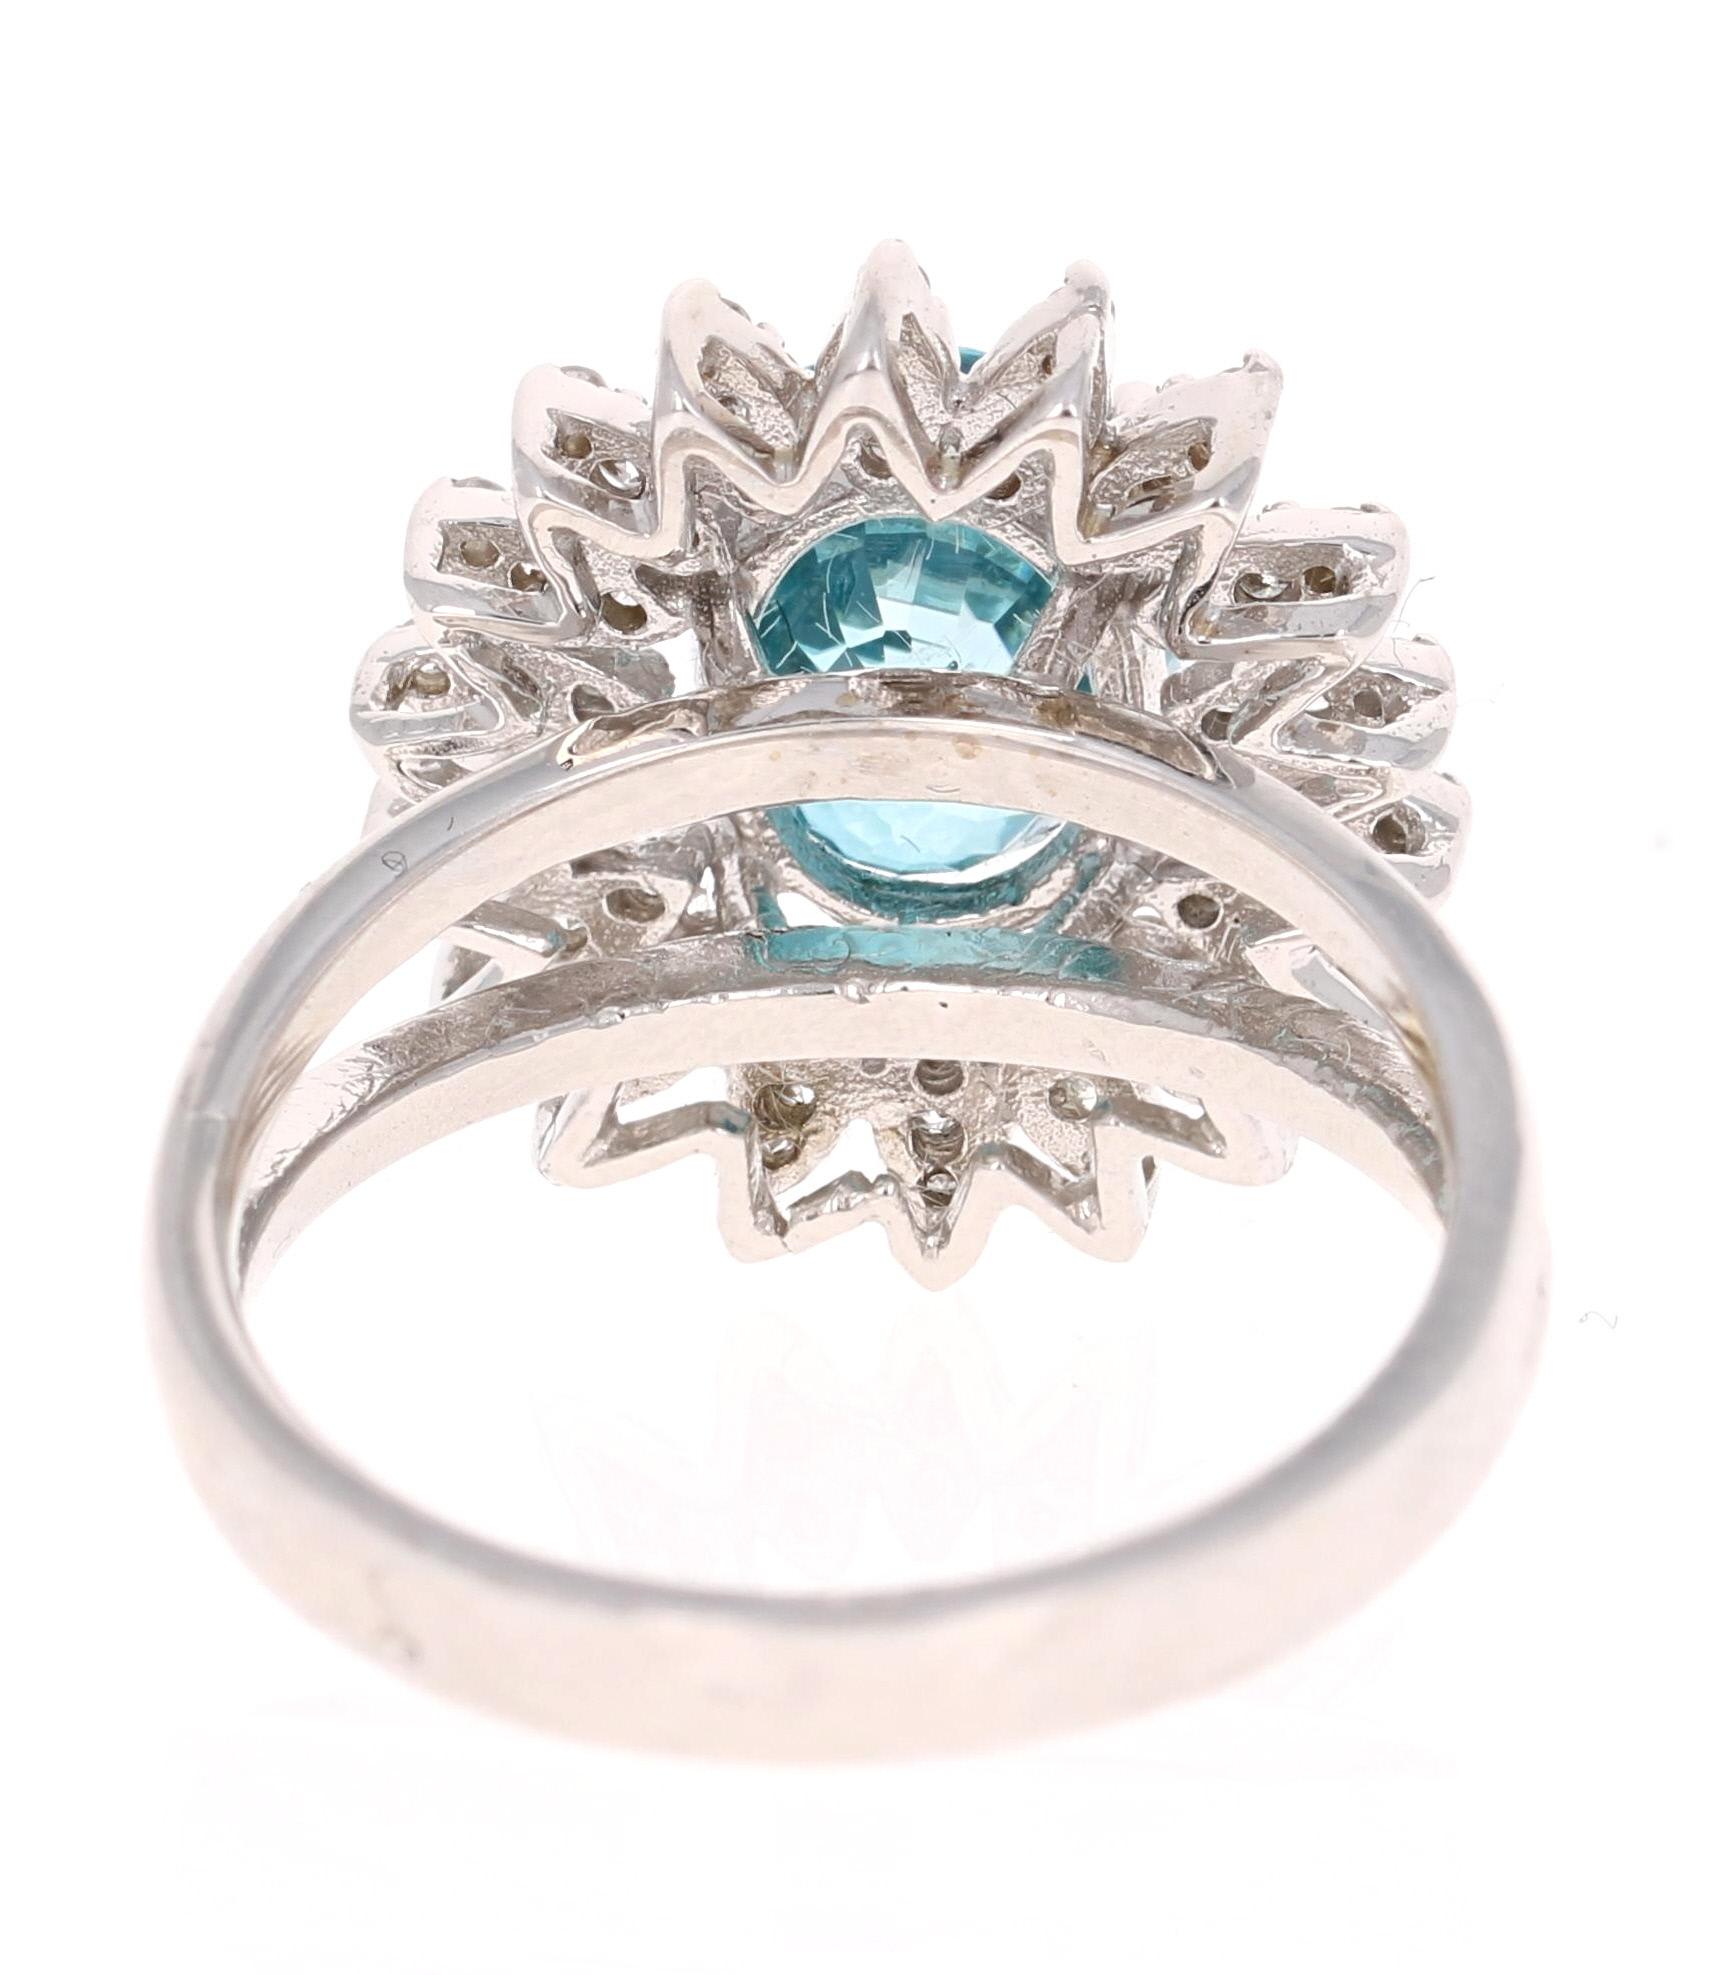 Oval Cut 4.74 Carat Blue Zircon Diamond White Gold Cocktail Ring For Sale